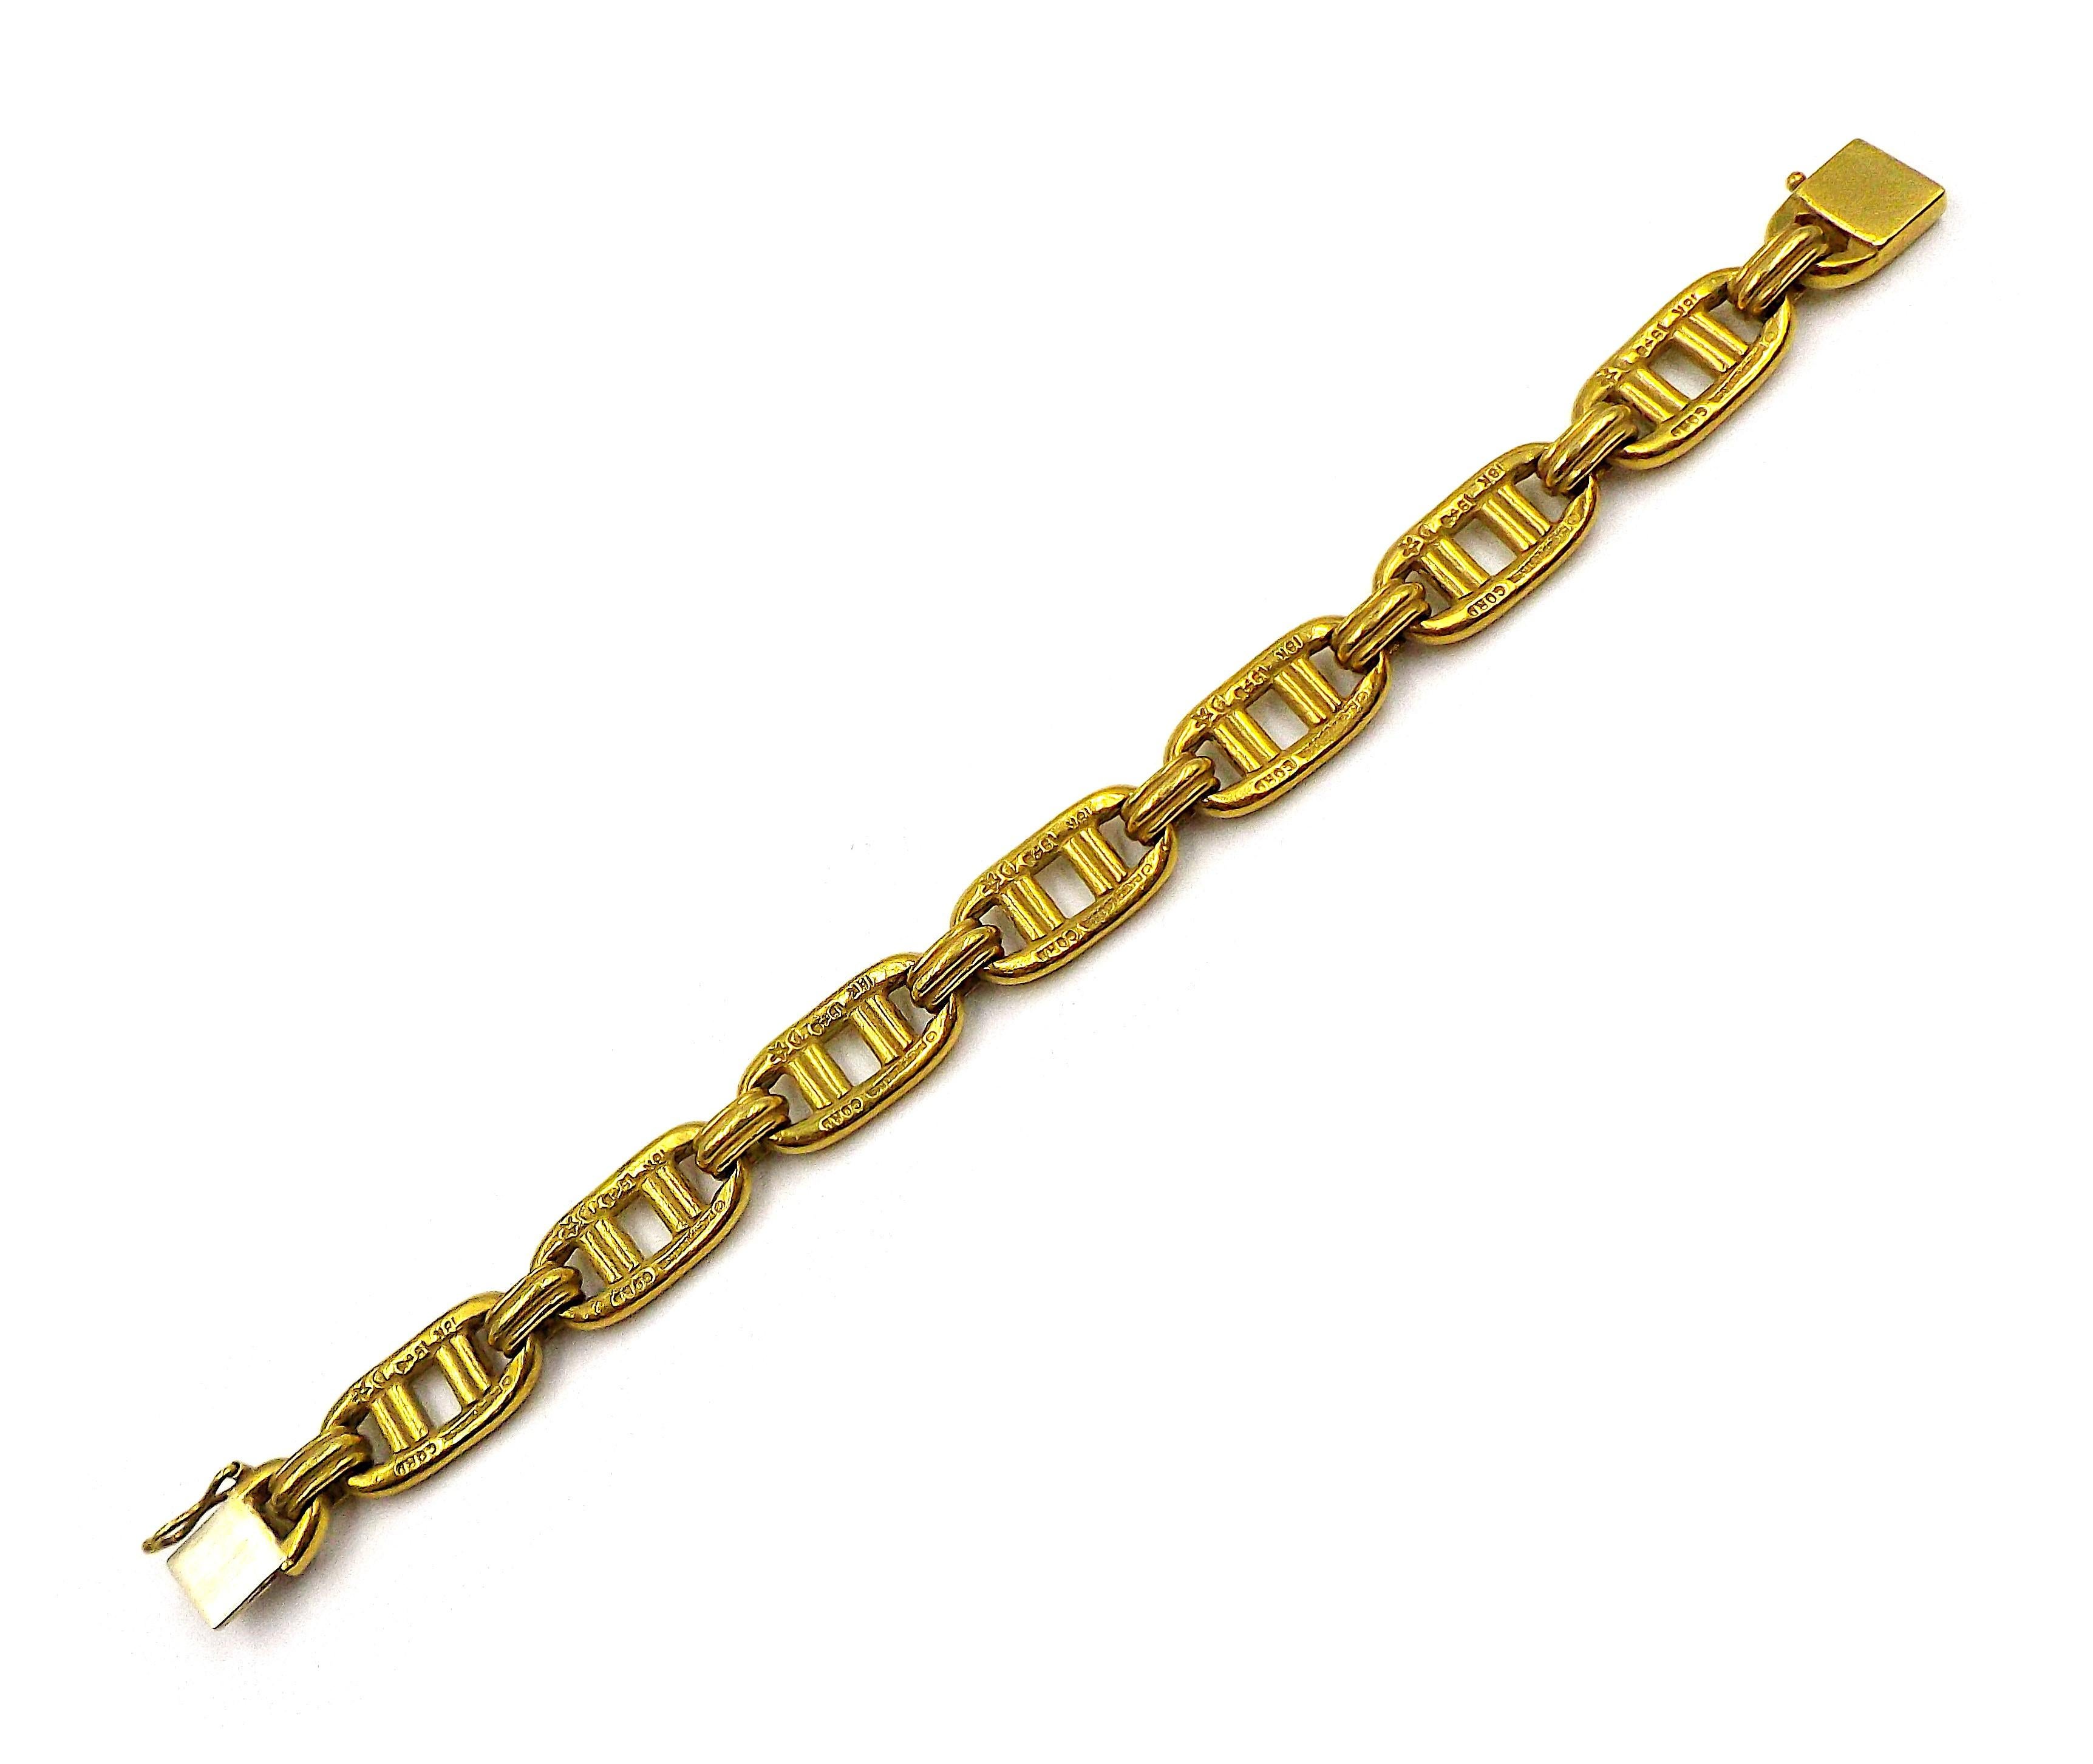 Consisting of a fancy link mariner style chain measuring approximately 11.00 mm wide, 7 inches long.
Signed KIESELSTEIN-CORD, stamped 18K, 1998 (maker's mark). Gross weight 43.20 dwt.